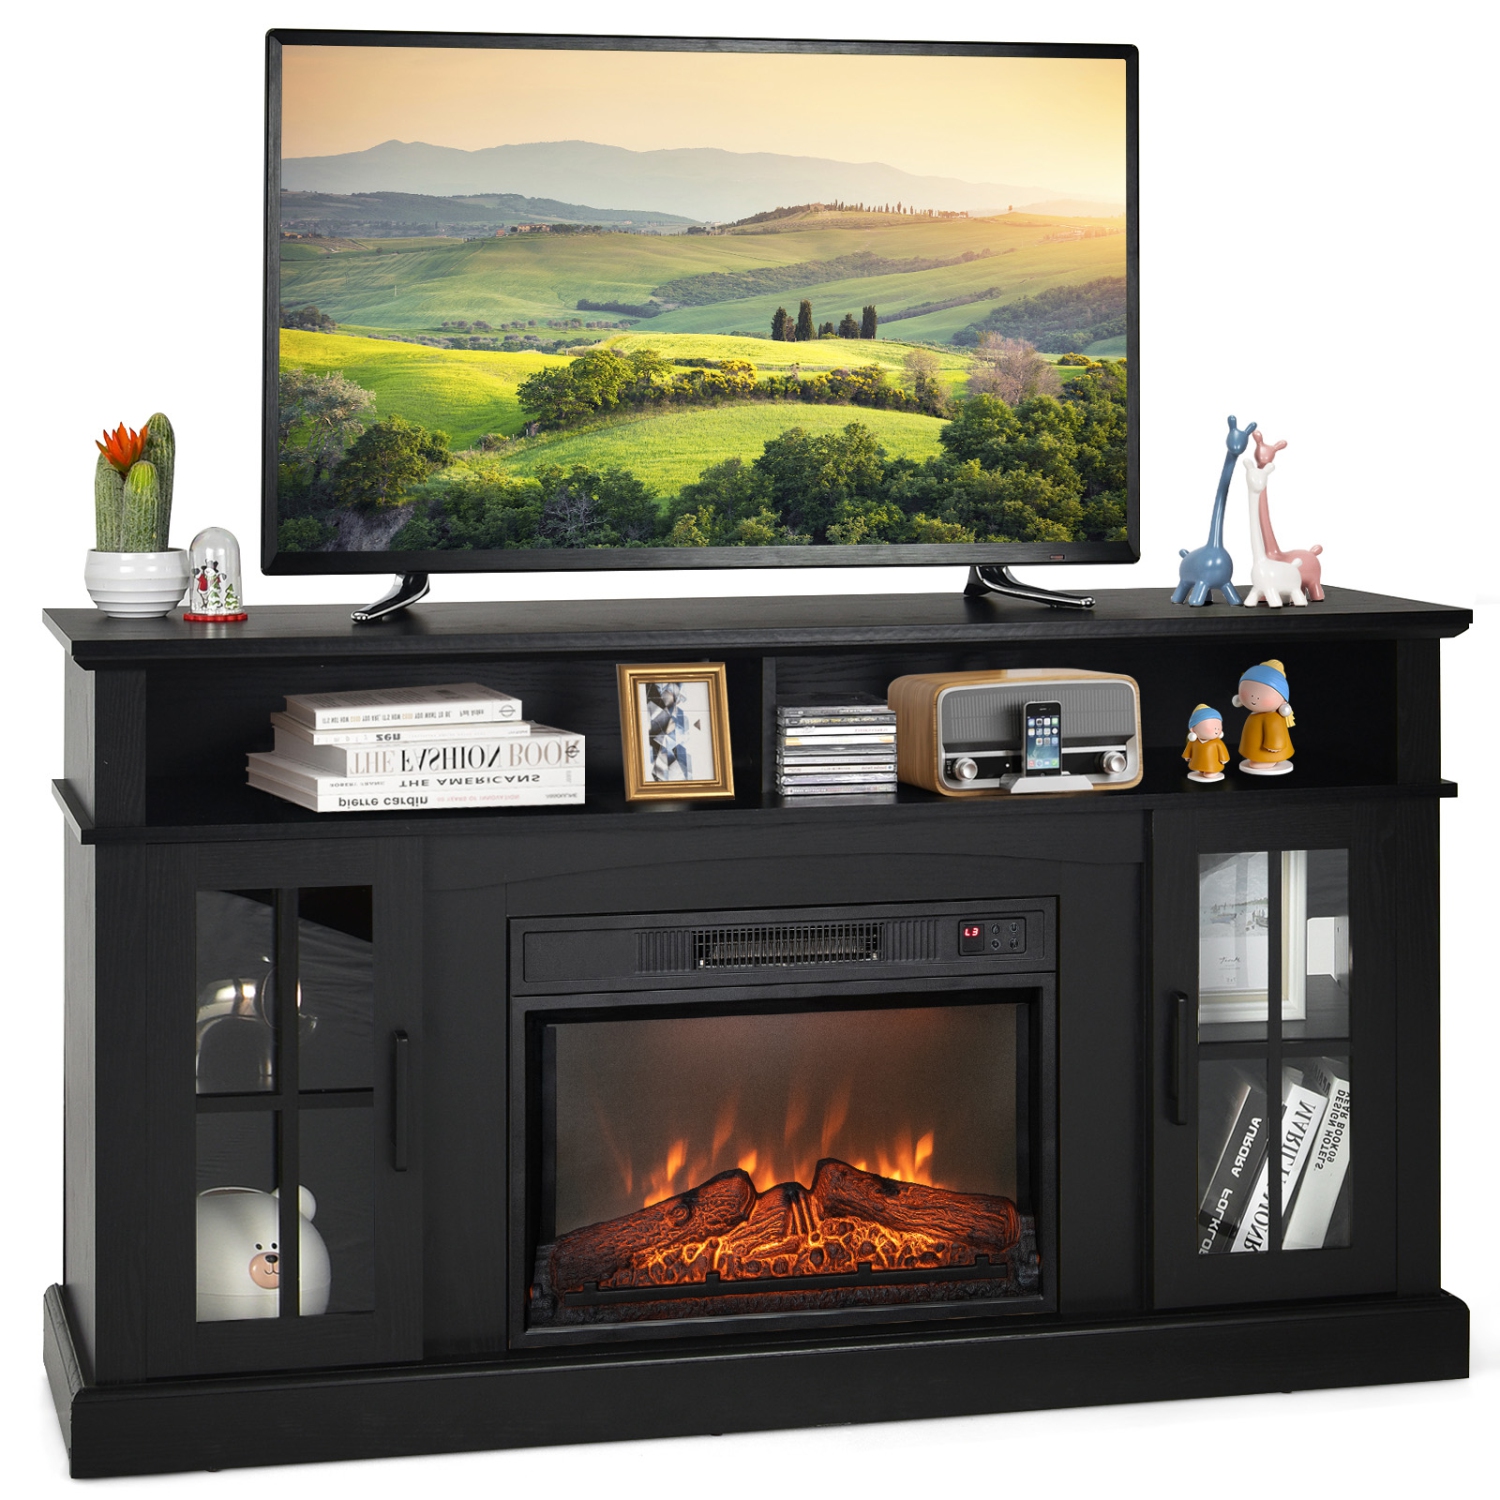 Costway 58" Fireplace TV Stand W/ 1400W Electric Fireplace for TVs up to 65 Inches